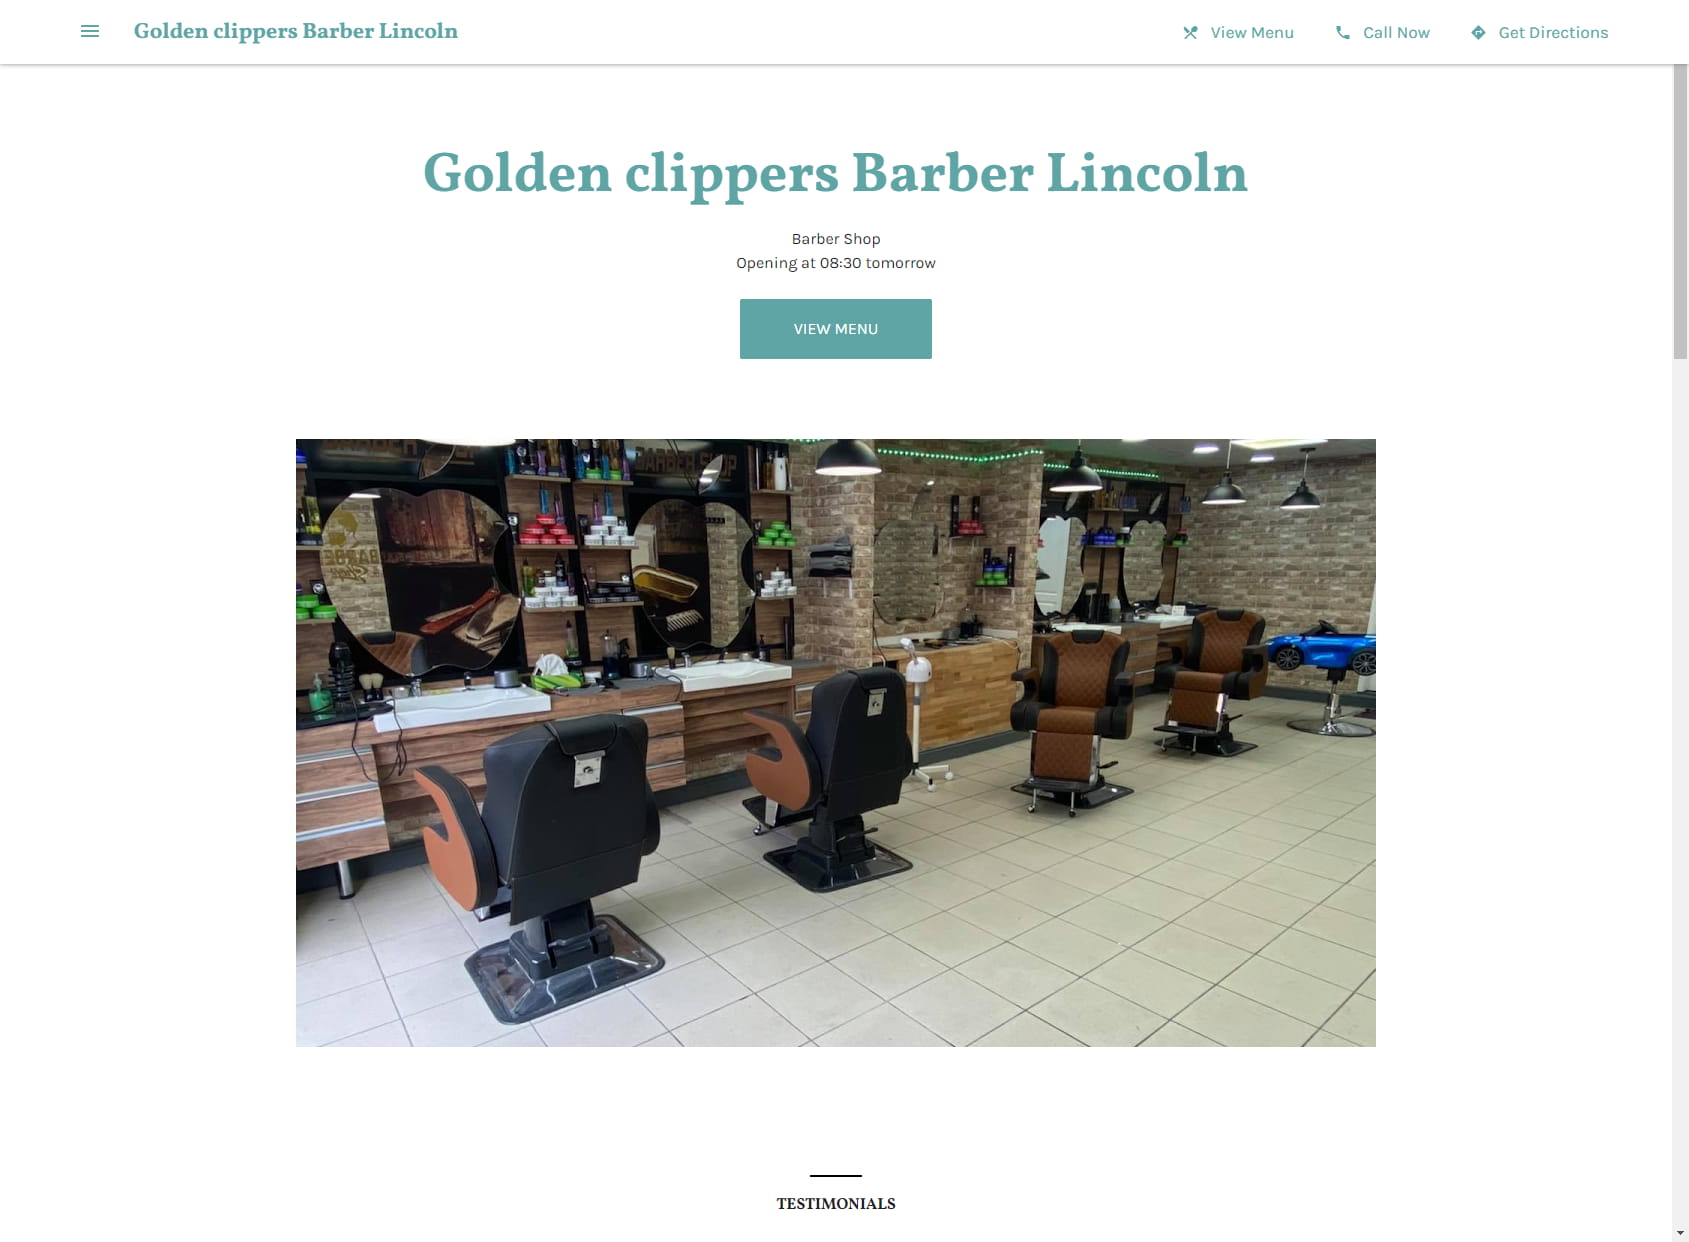 Golden clippers Barber Lincoln